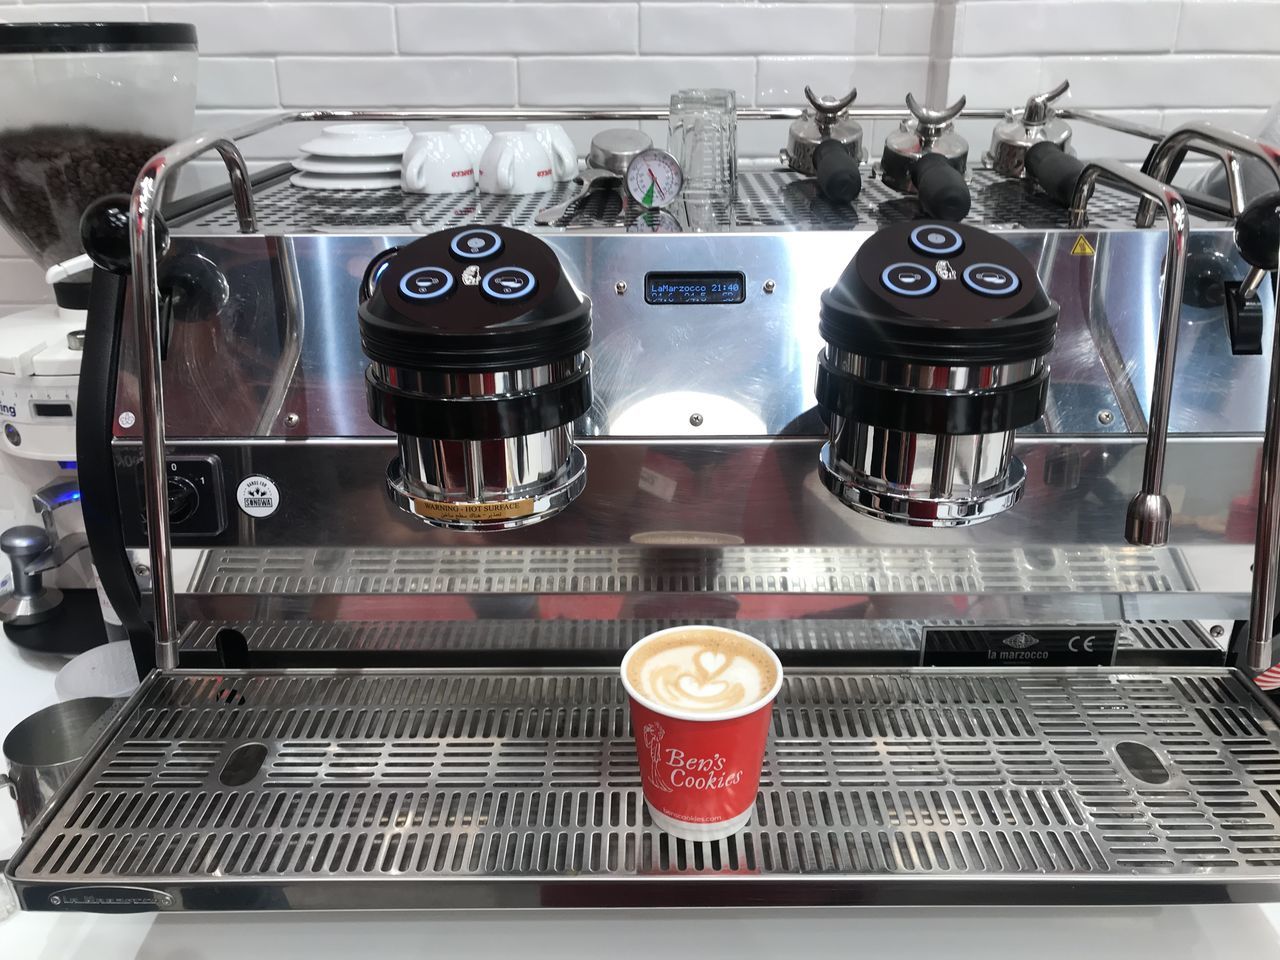 espresso machine, technology, indoors, coffeemaker, coffee, no people, equipment, food and drink, metal, machinery, espresso maker, drink, appliance